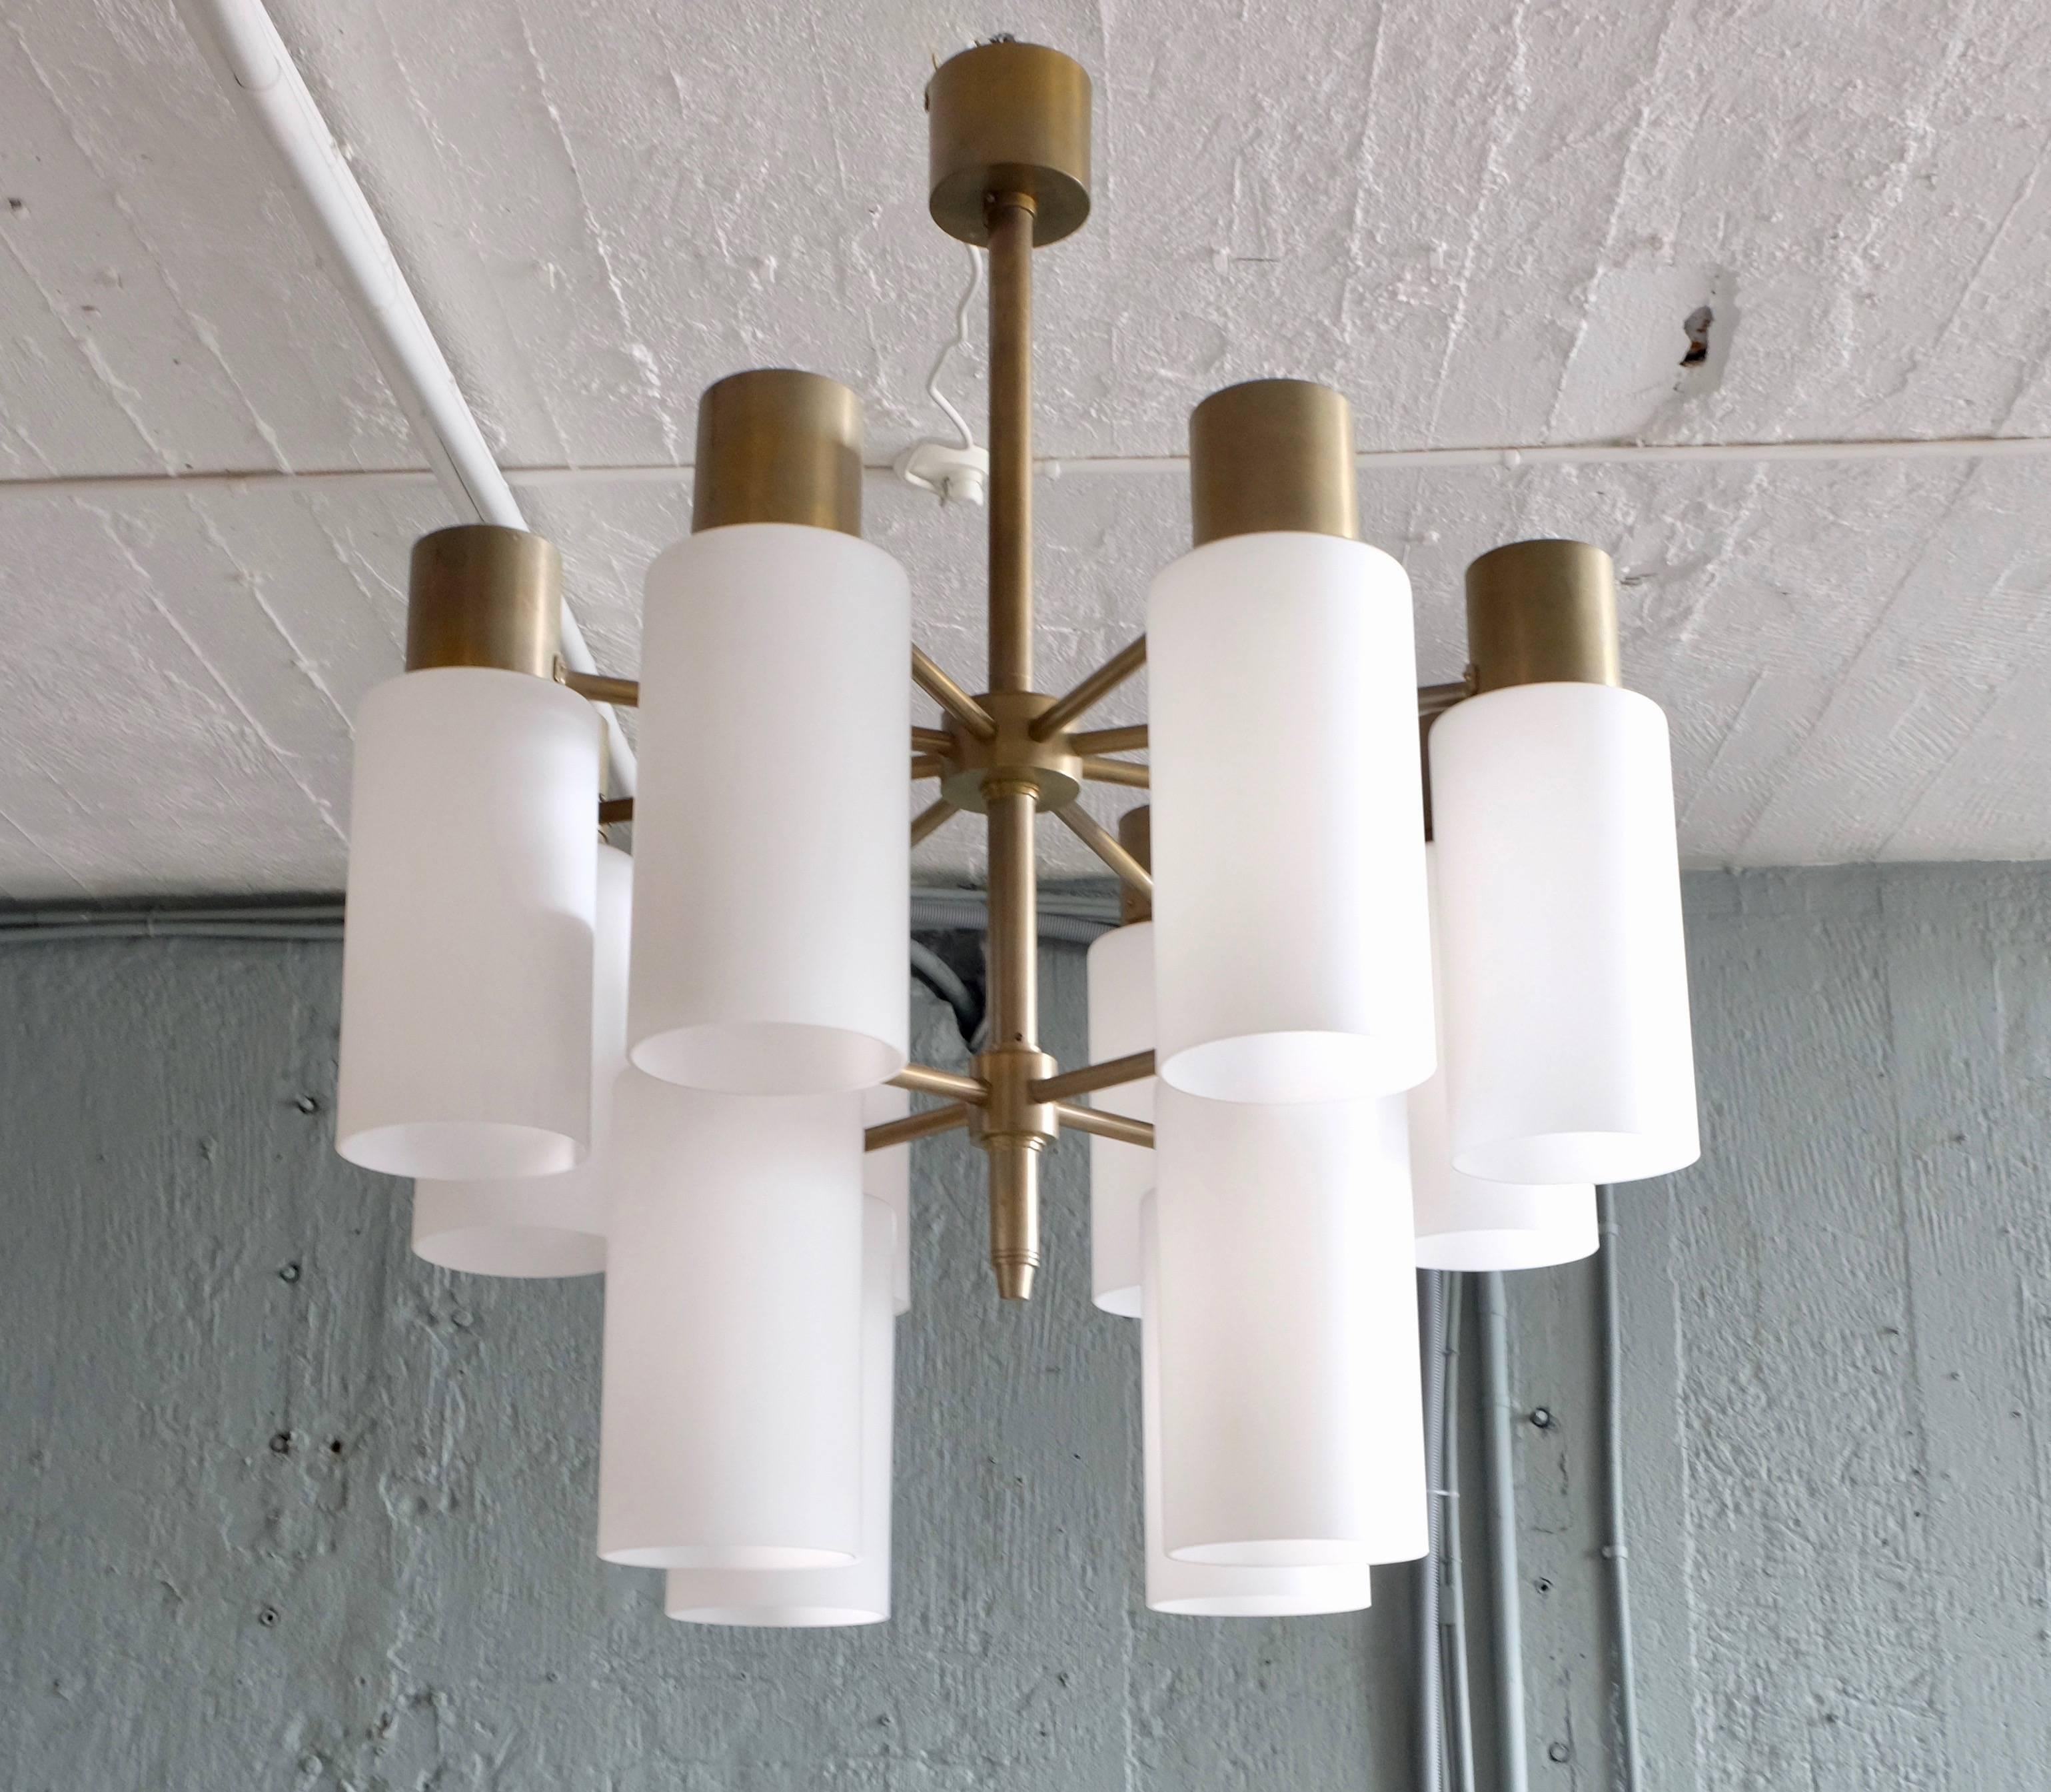 Swedish Rare Pair of Hans-Agne Jakobsson Brass Chandeliers with Opaline Shades, 1960s For Sale